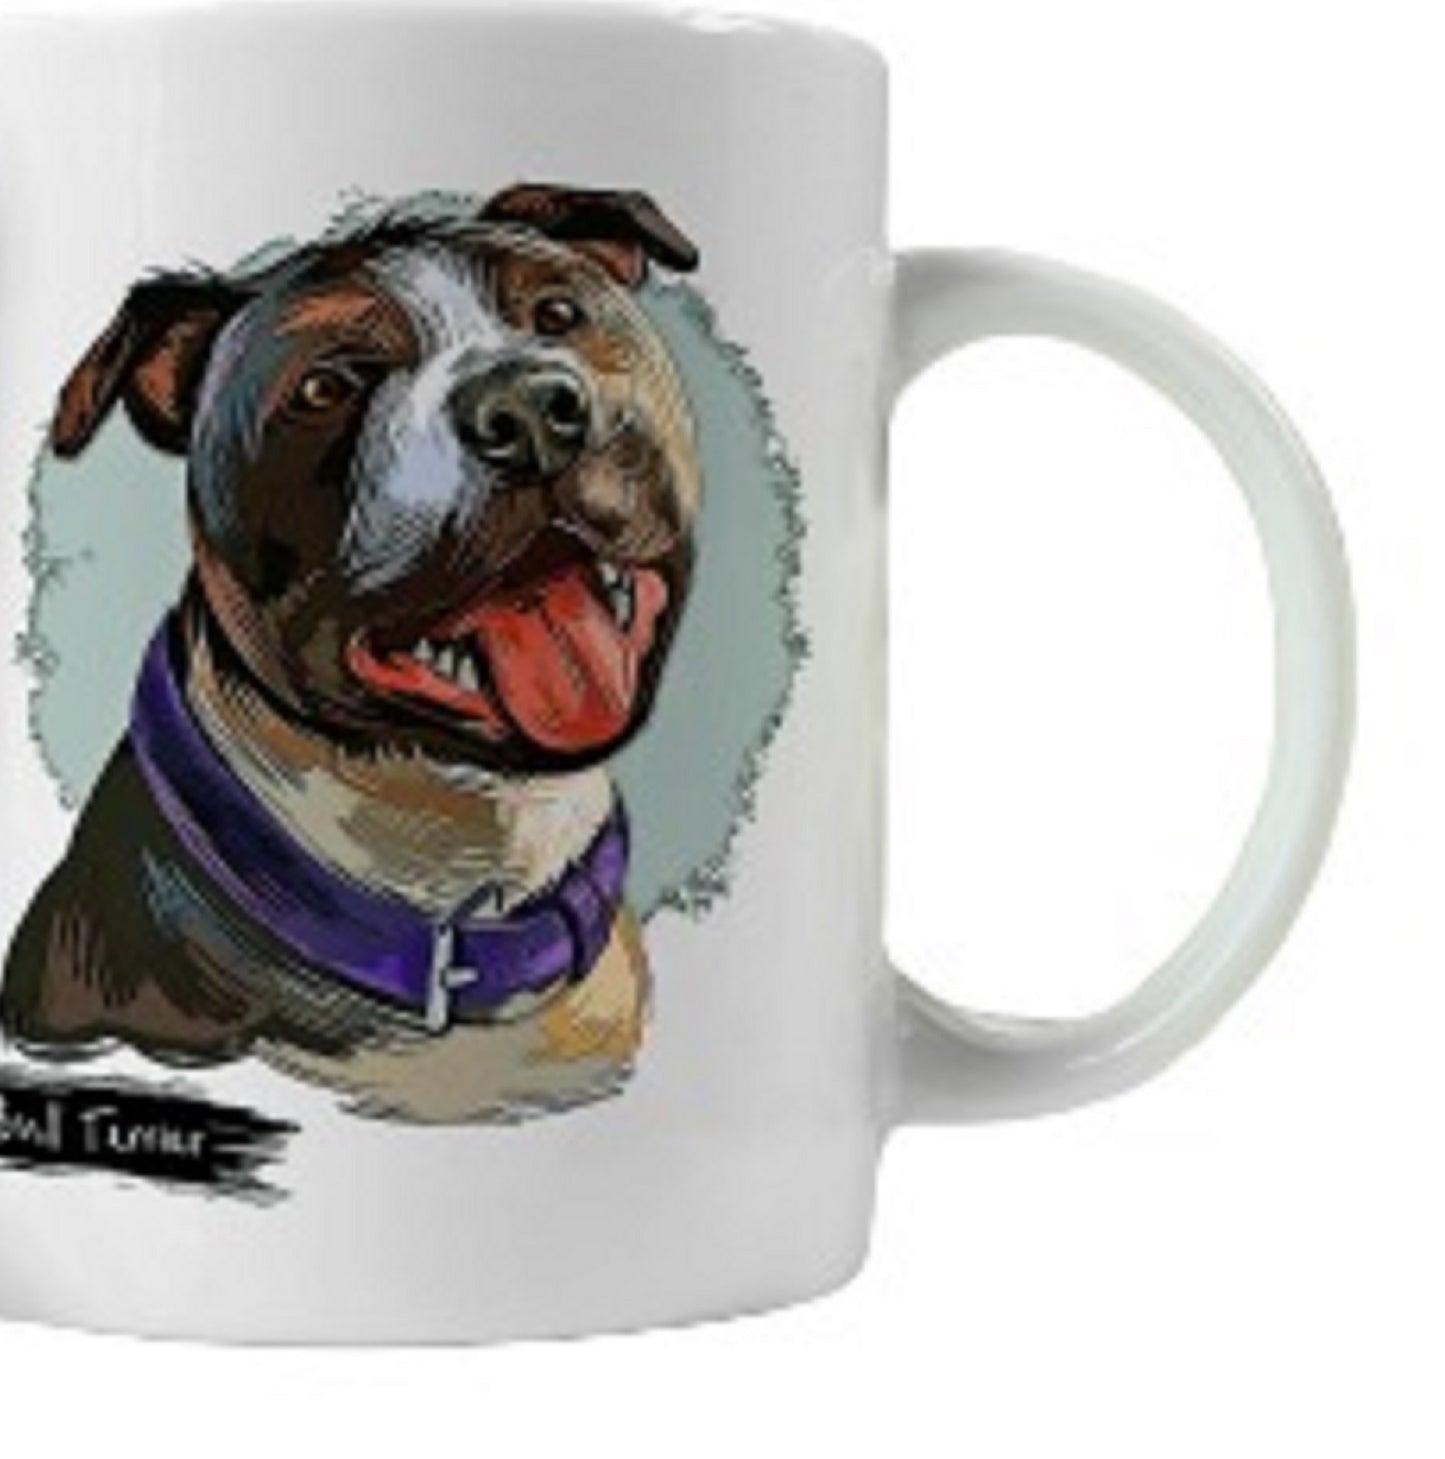 15oz Mug Only Staffy Dog Head Mug and Coaster by Free Spirit Accessories sold by Free Spirit Accessories